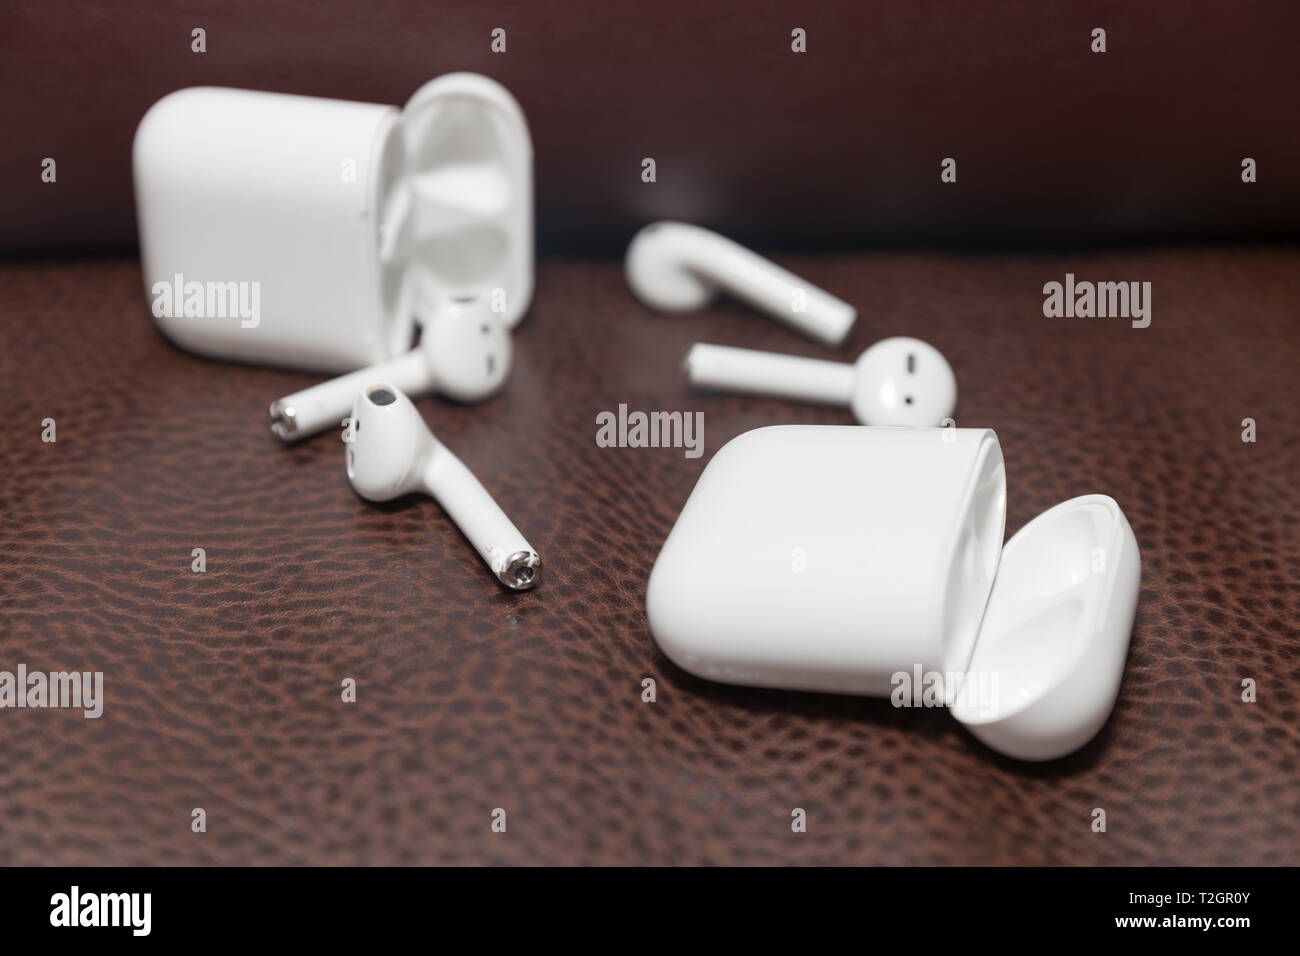 Lawrence Township New Jersey, March 11, 2019:Apple AirPods wireless  Bluetooth headphones and charging case for Apple iPhone. New Apple Earpods  Airpods Stock Photo - Alamy